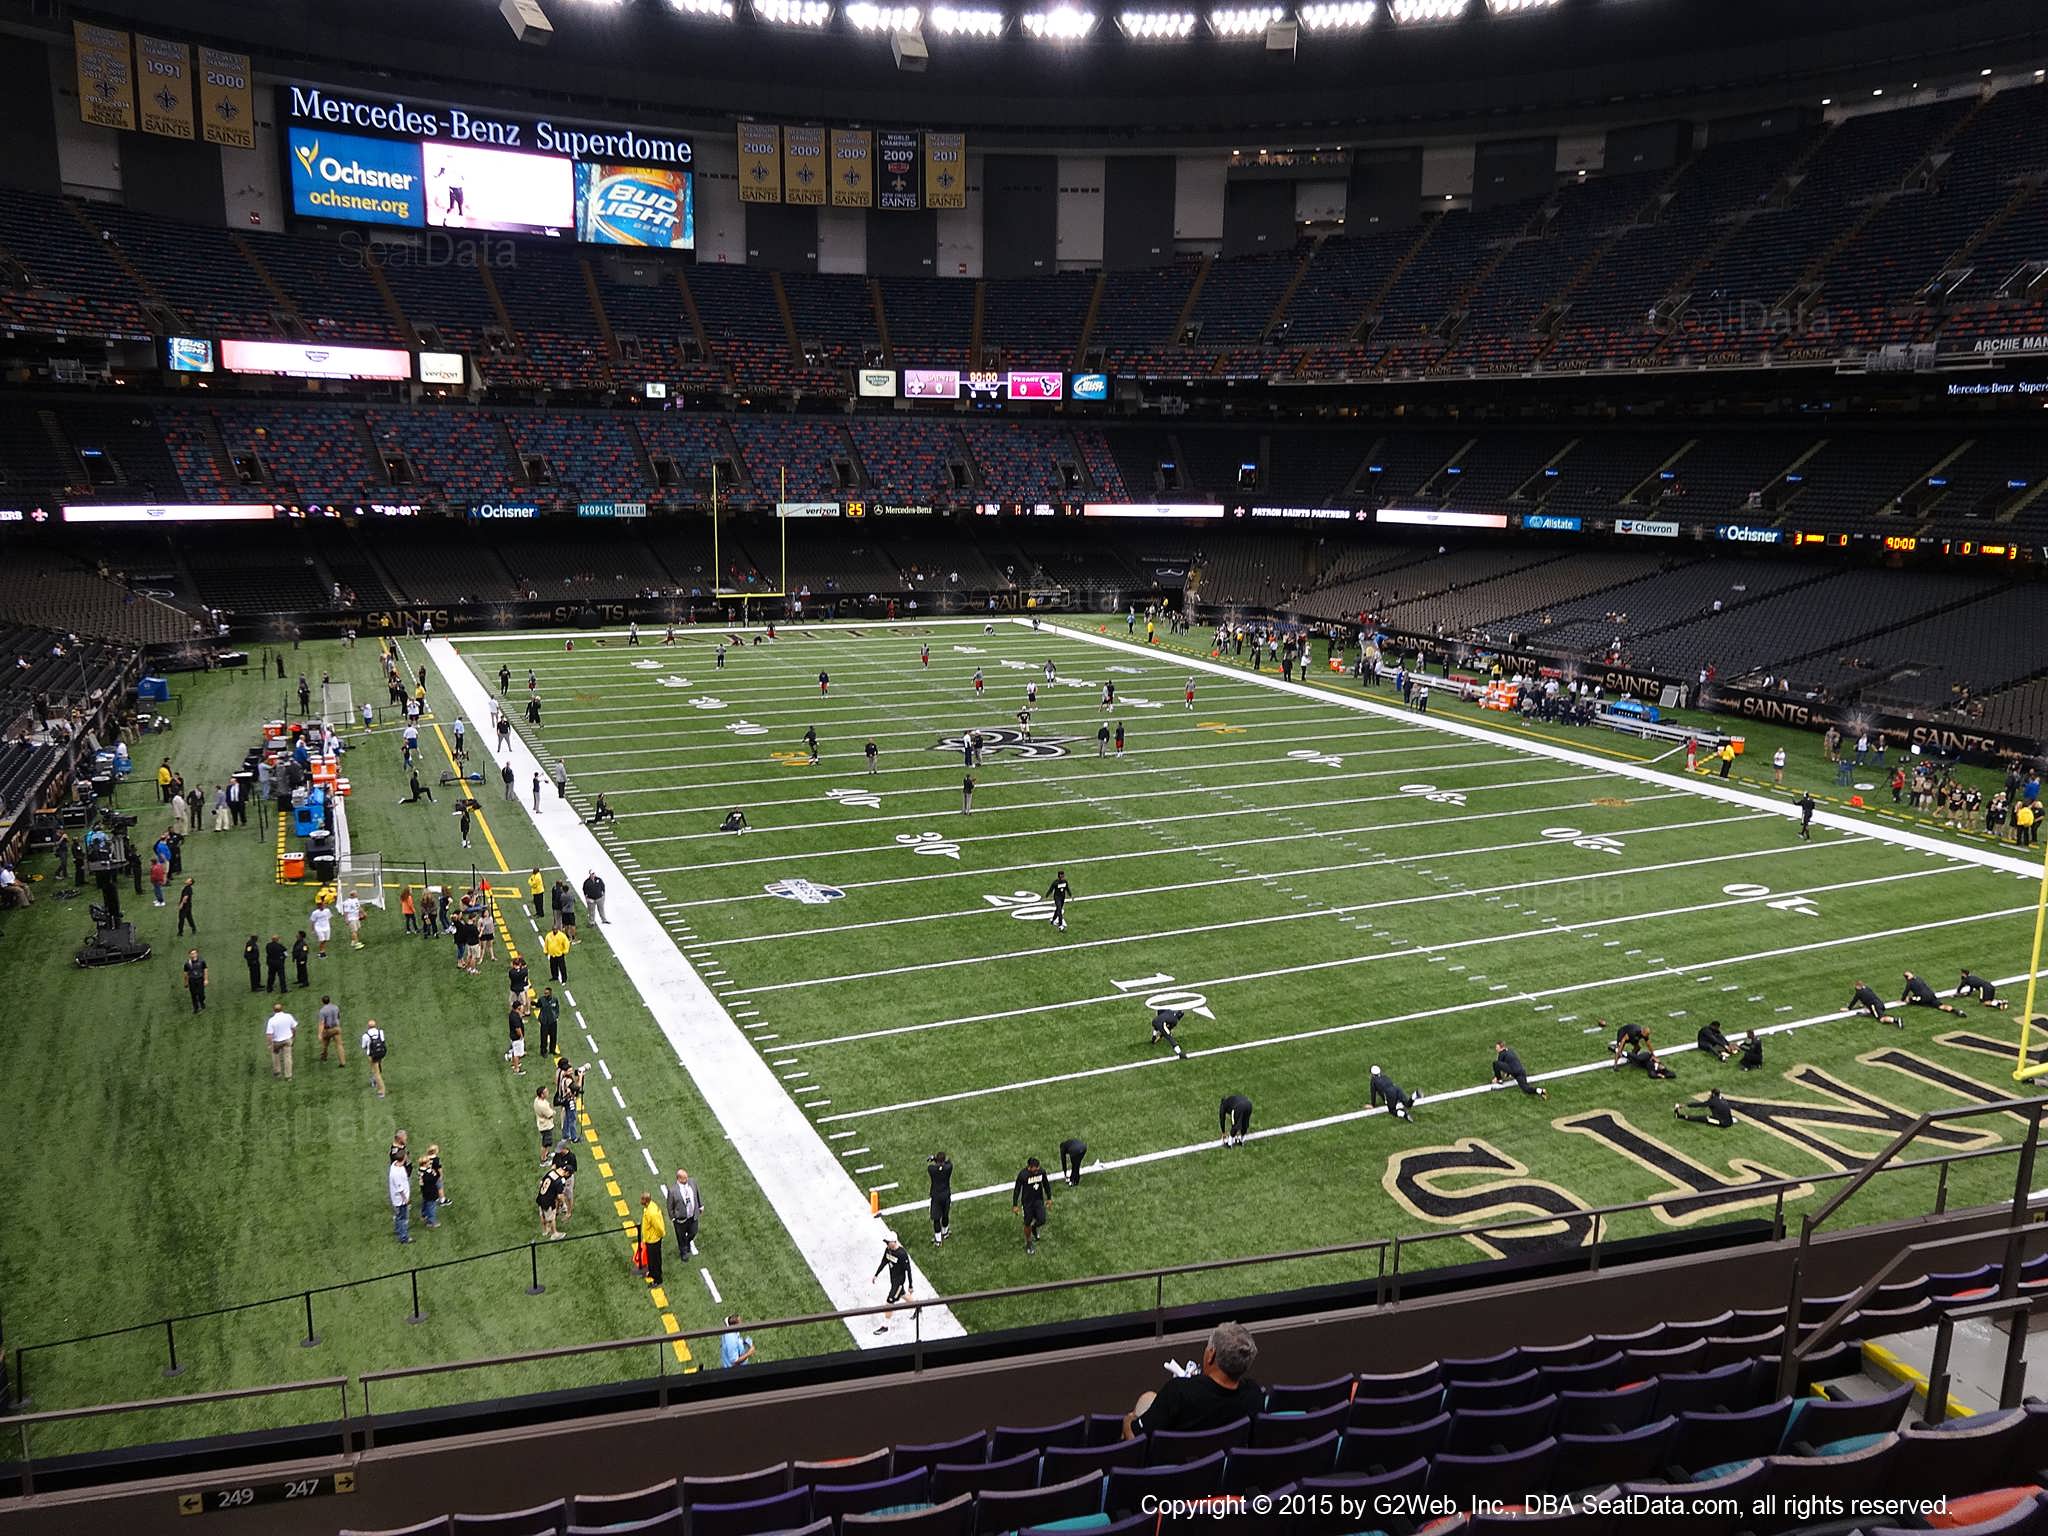 Seat view from section 327 at the Mercedes-Benz Superdome, home of the New Orleans Saints